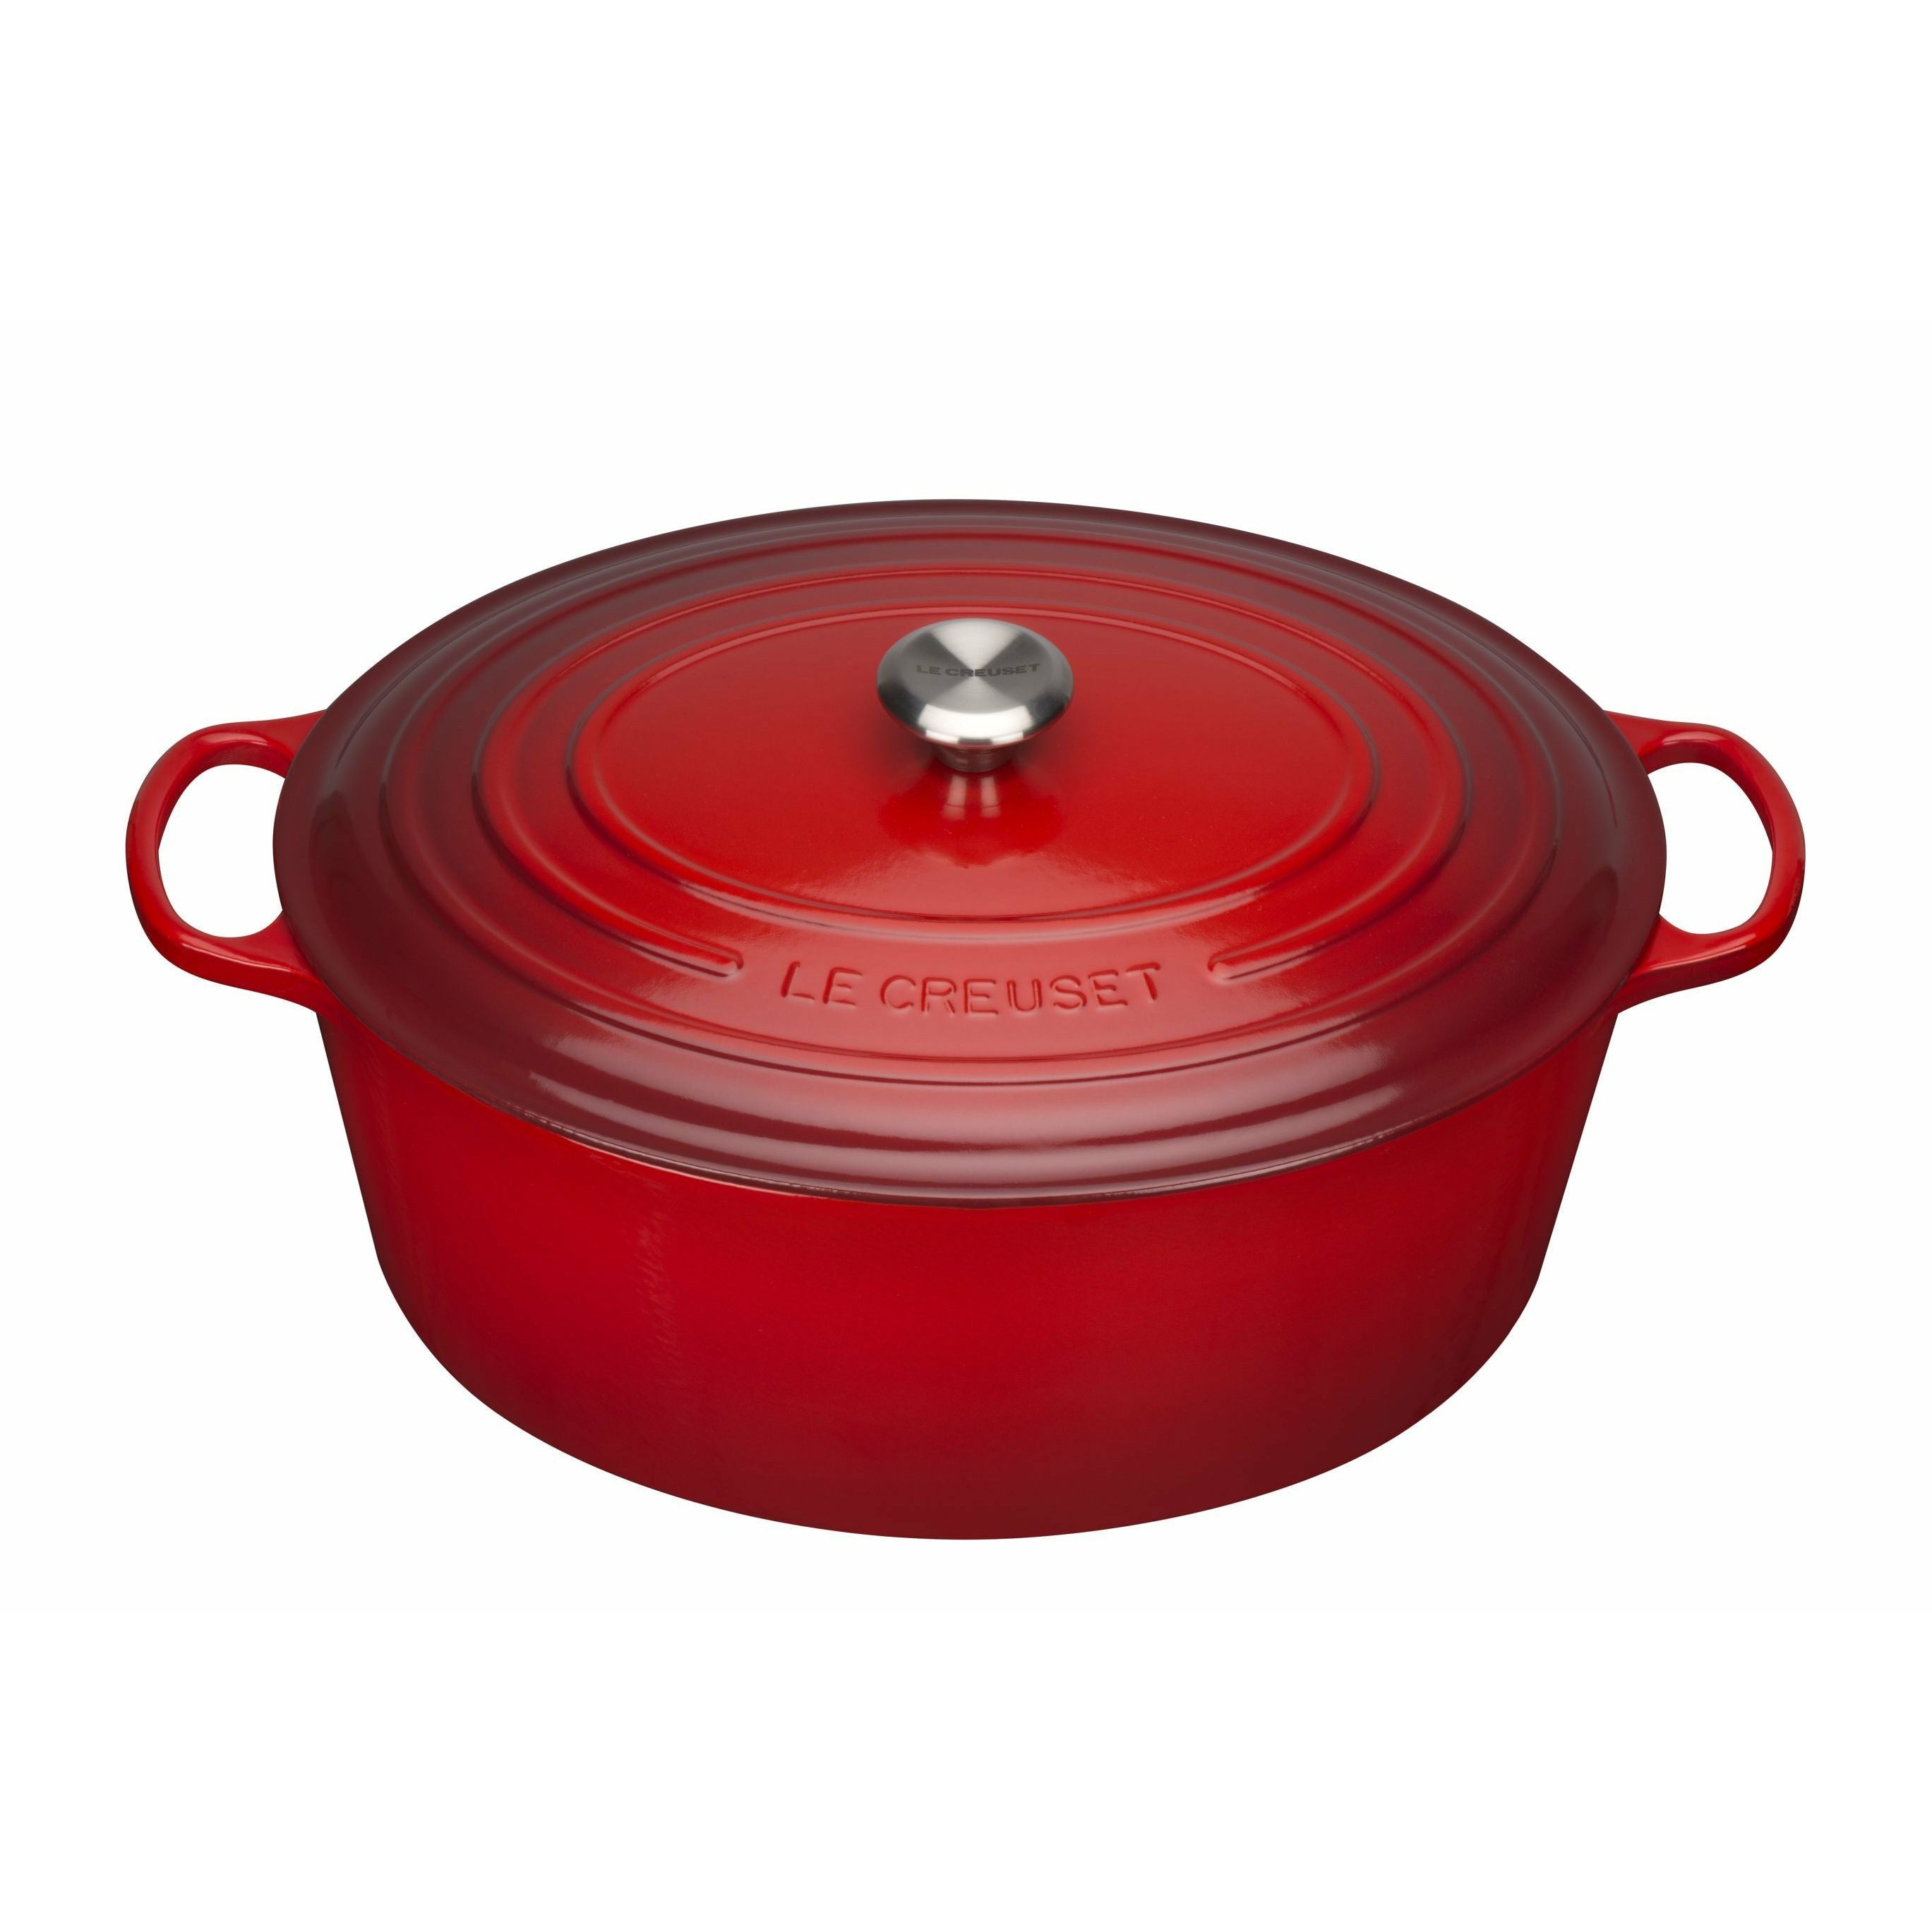 Le Creuset Signature Oval Roaster 40 Cm, Cherry Red